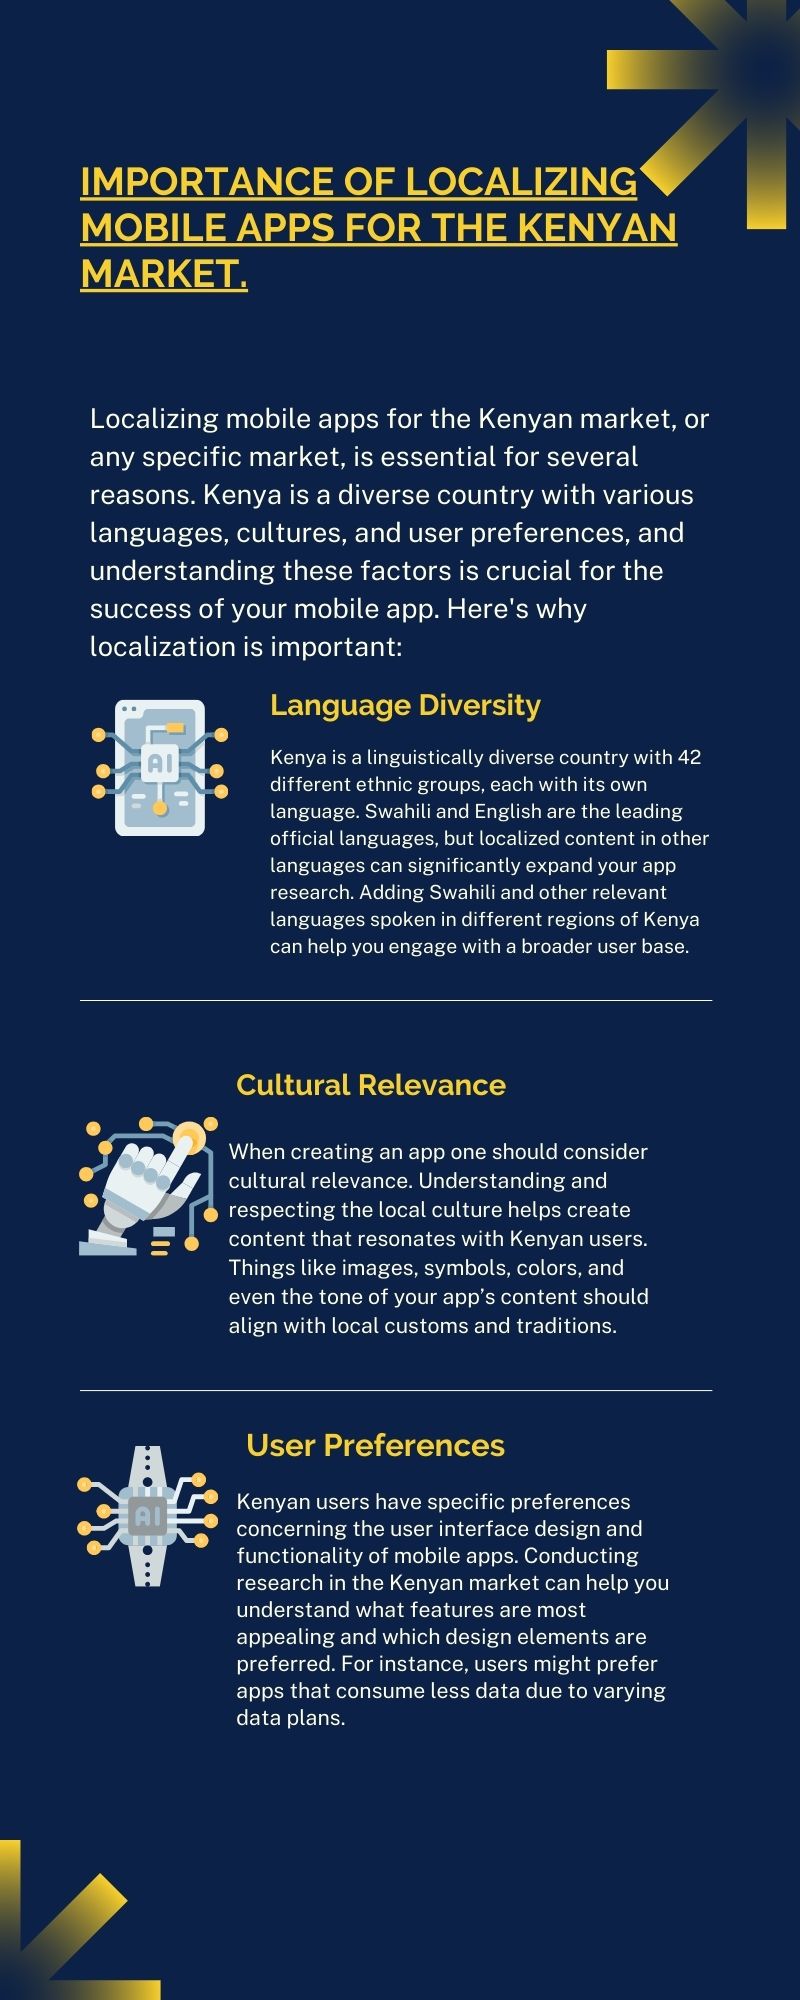 IMPORTANCE OF LOCALIZING MOBILE APPS FOR THE KENYAN MARKET.